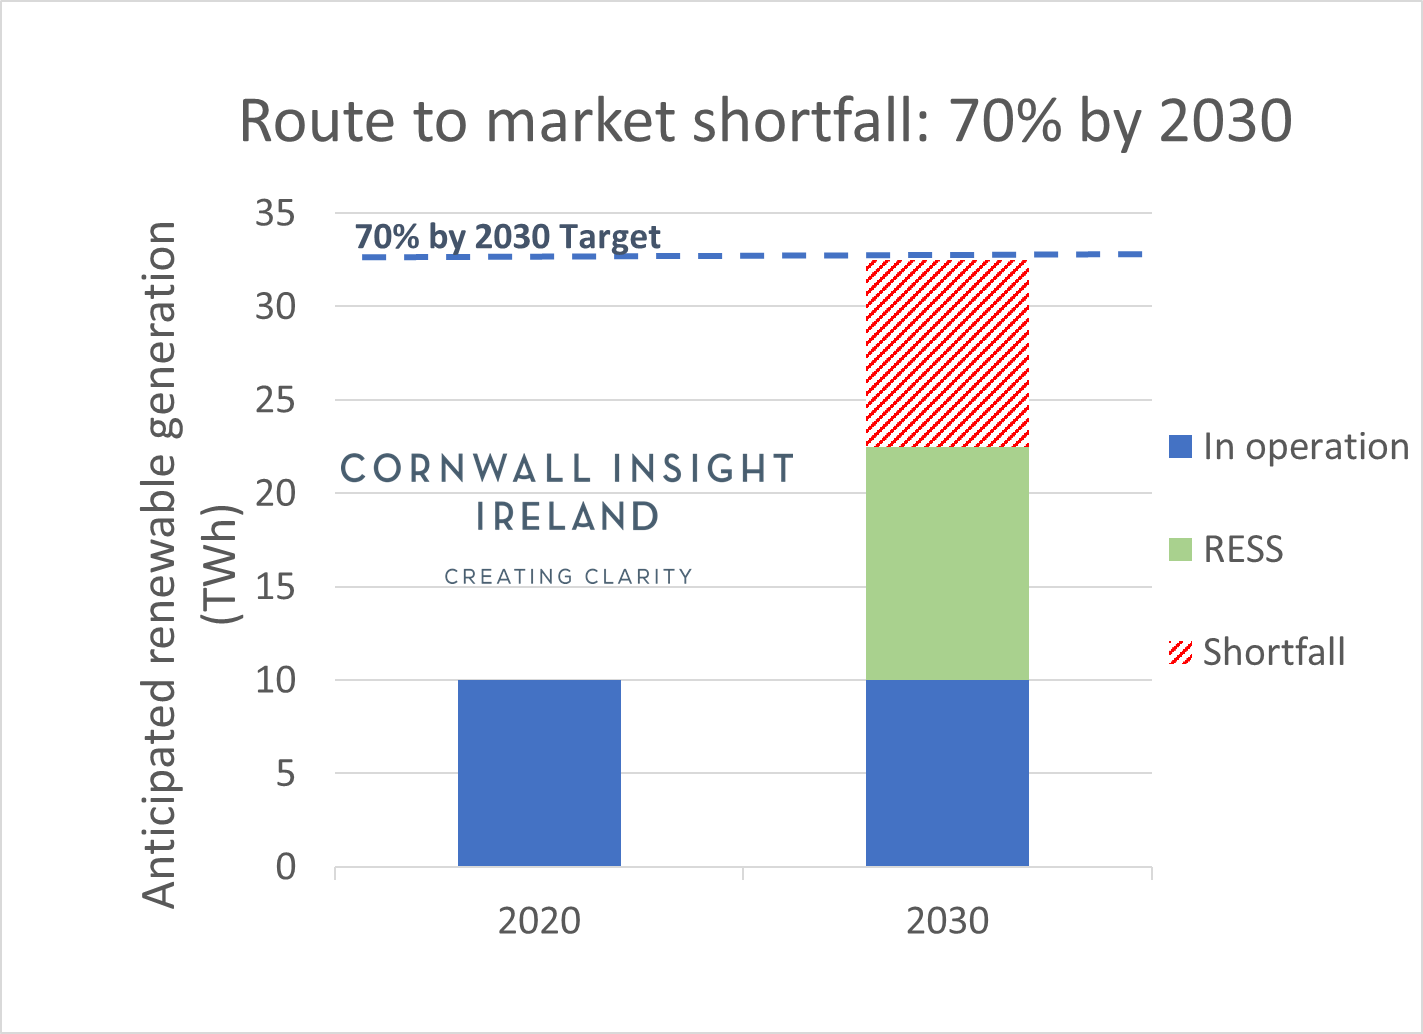 A graph showing route to market shortfall in Ireland